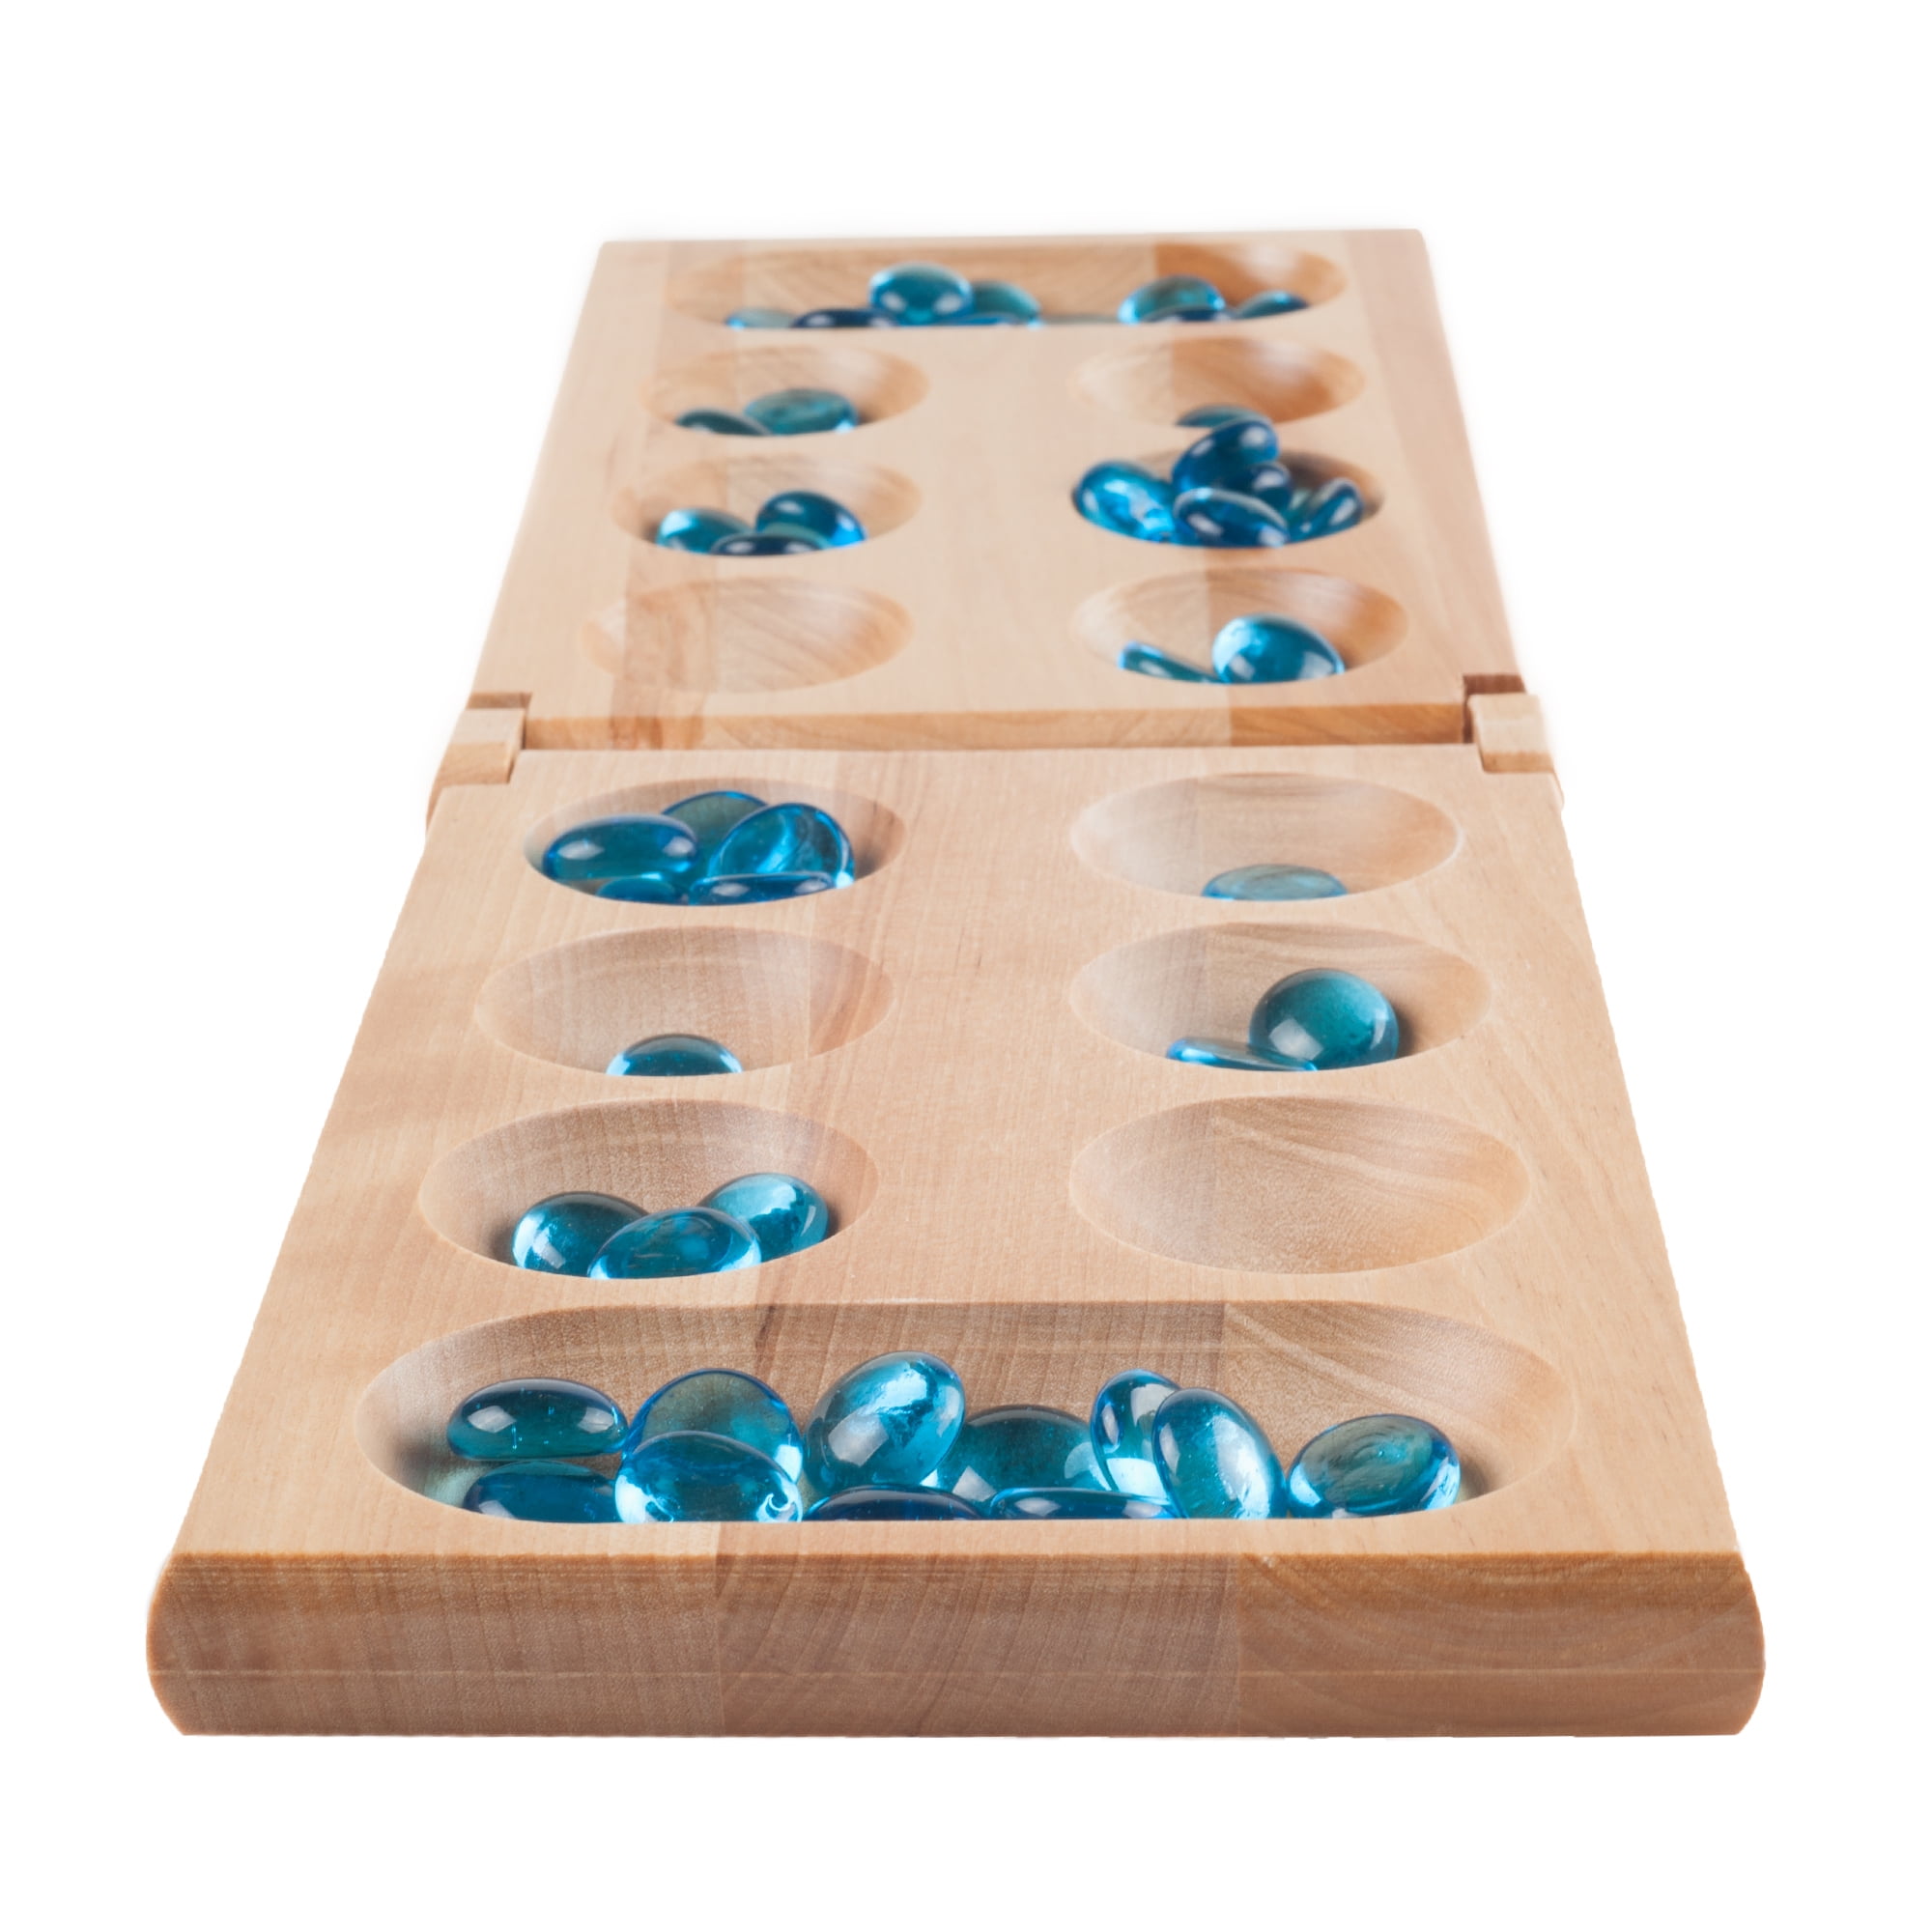 Mancala Board Game Foldable – Toy Division